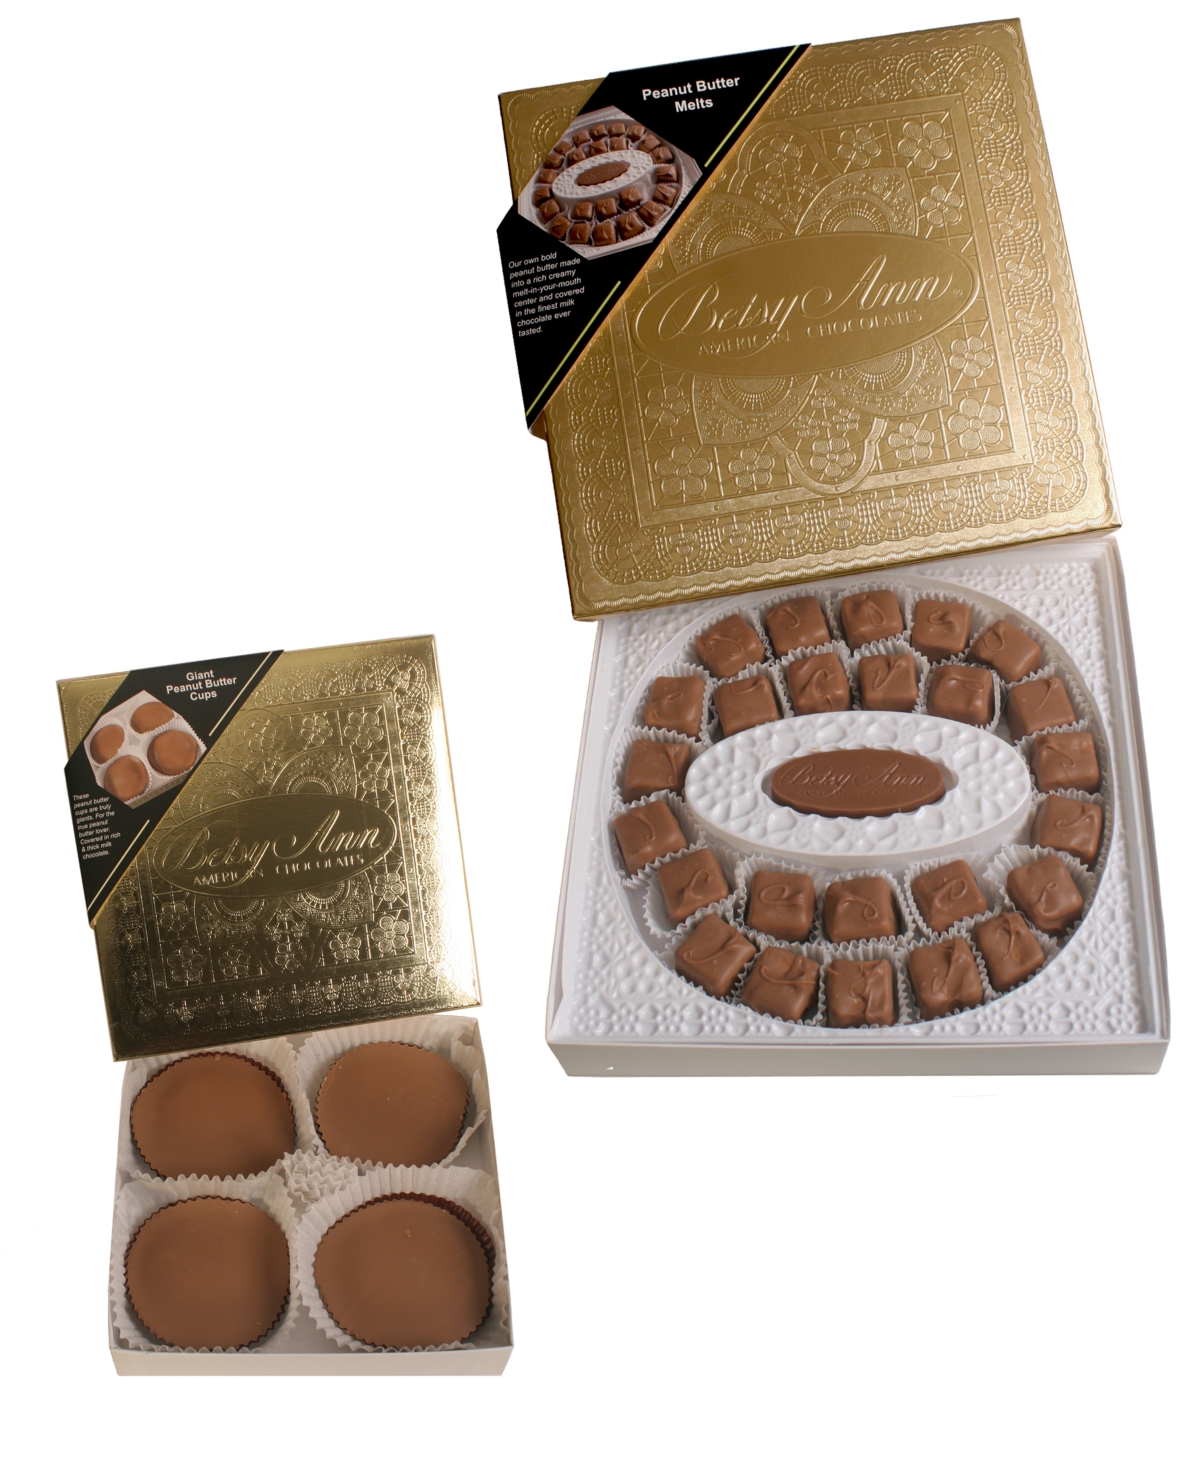 Betsy Ann Chocolates 14oz Milk Chocolate Peanut Butter Meltaways & 4 Piece Giant Peanut Butter Cups Gift Bundle, Approxim In No Color